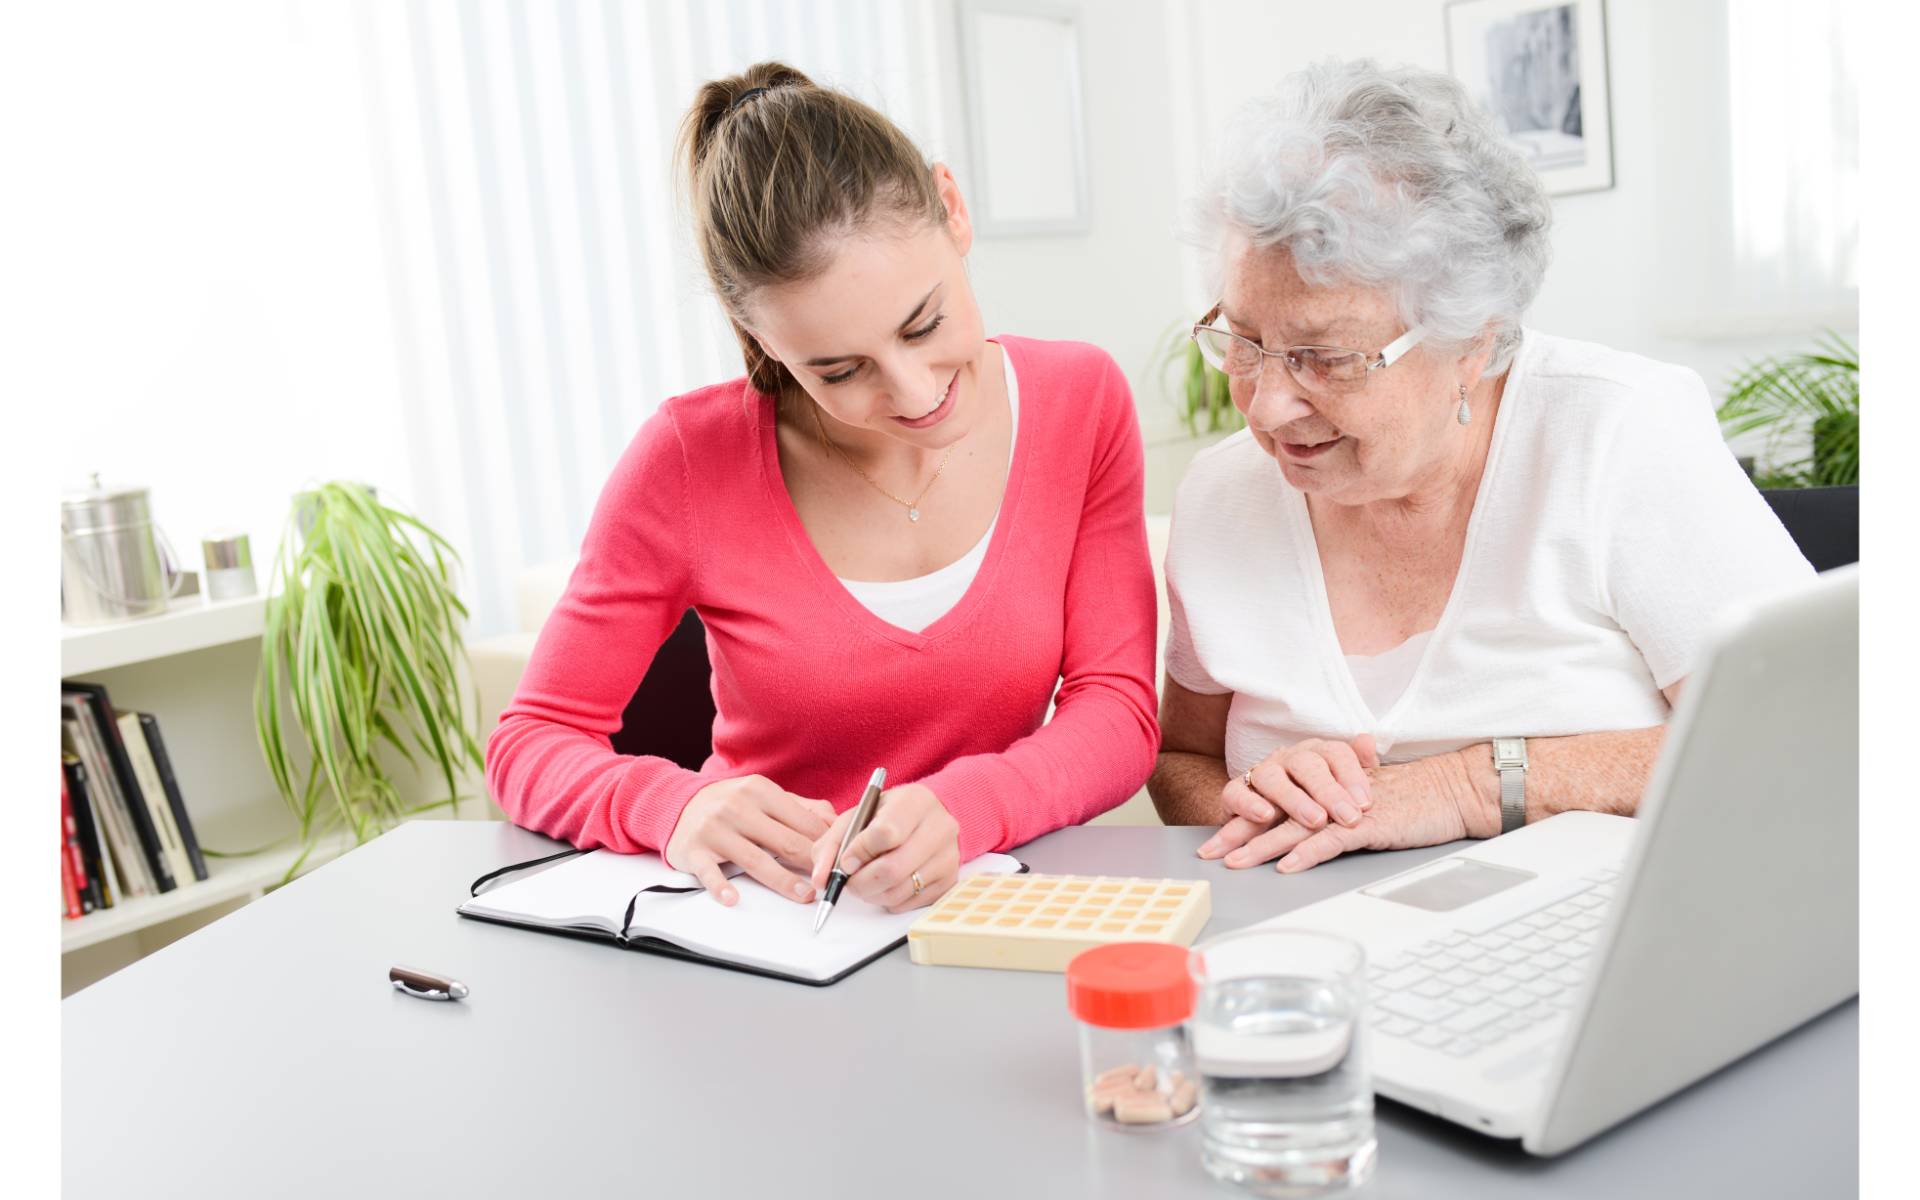 Older woman and younger family member reviewing medication schedule. Cover image for article about medication management.